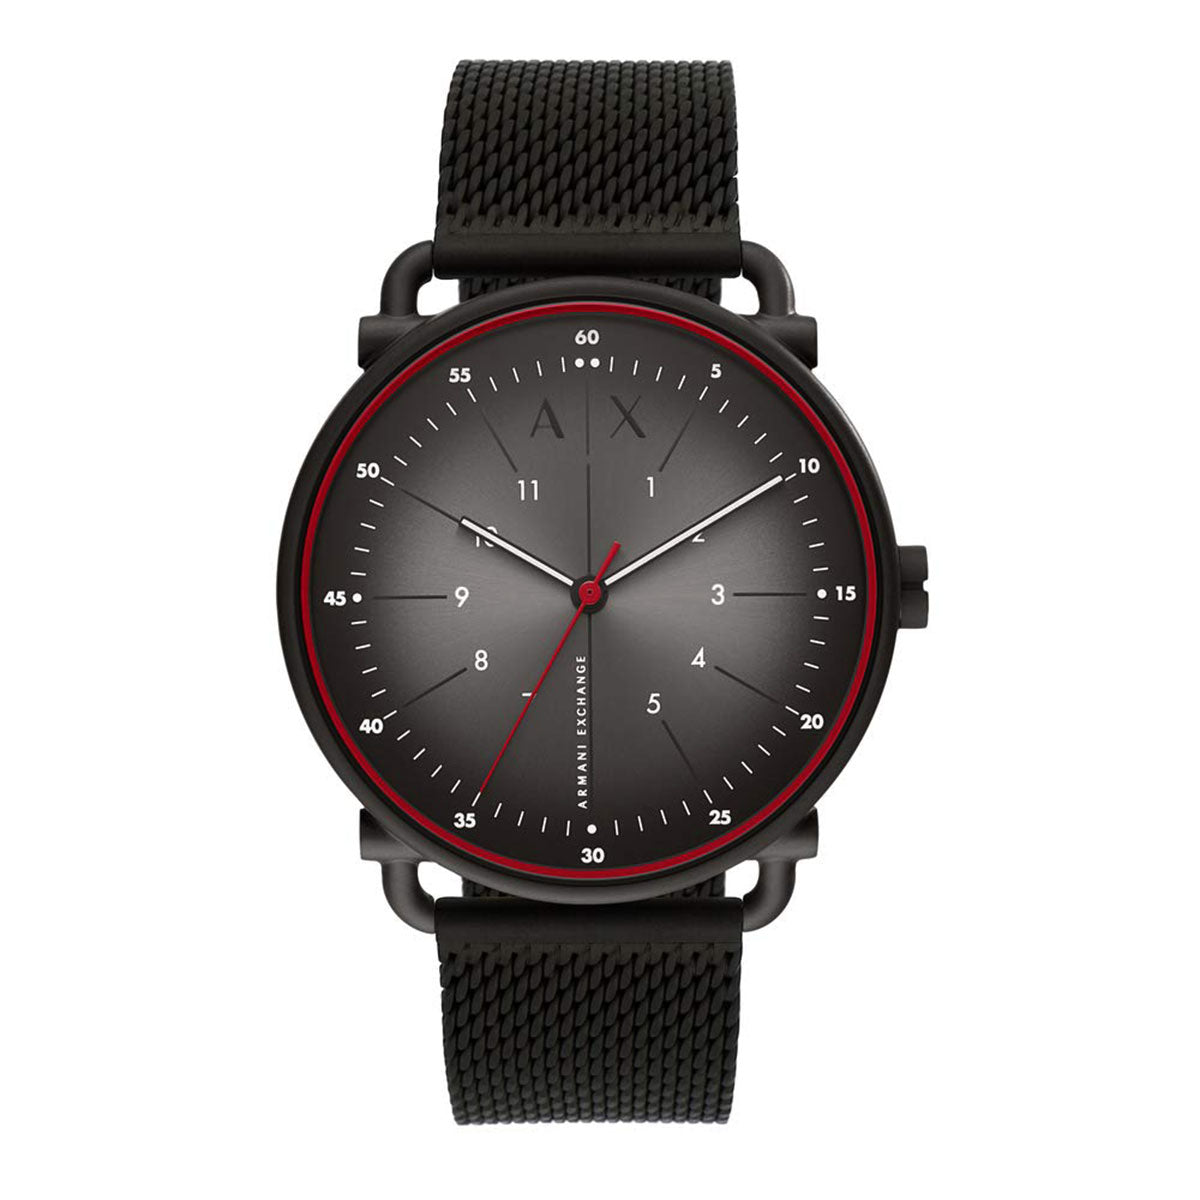 Elegant black strap with small Red frame men’s watch